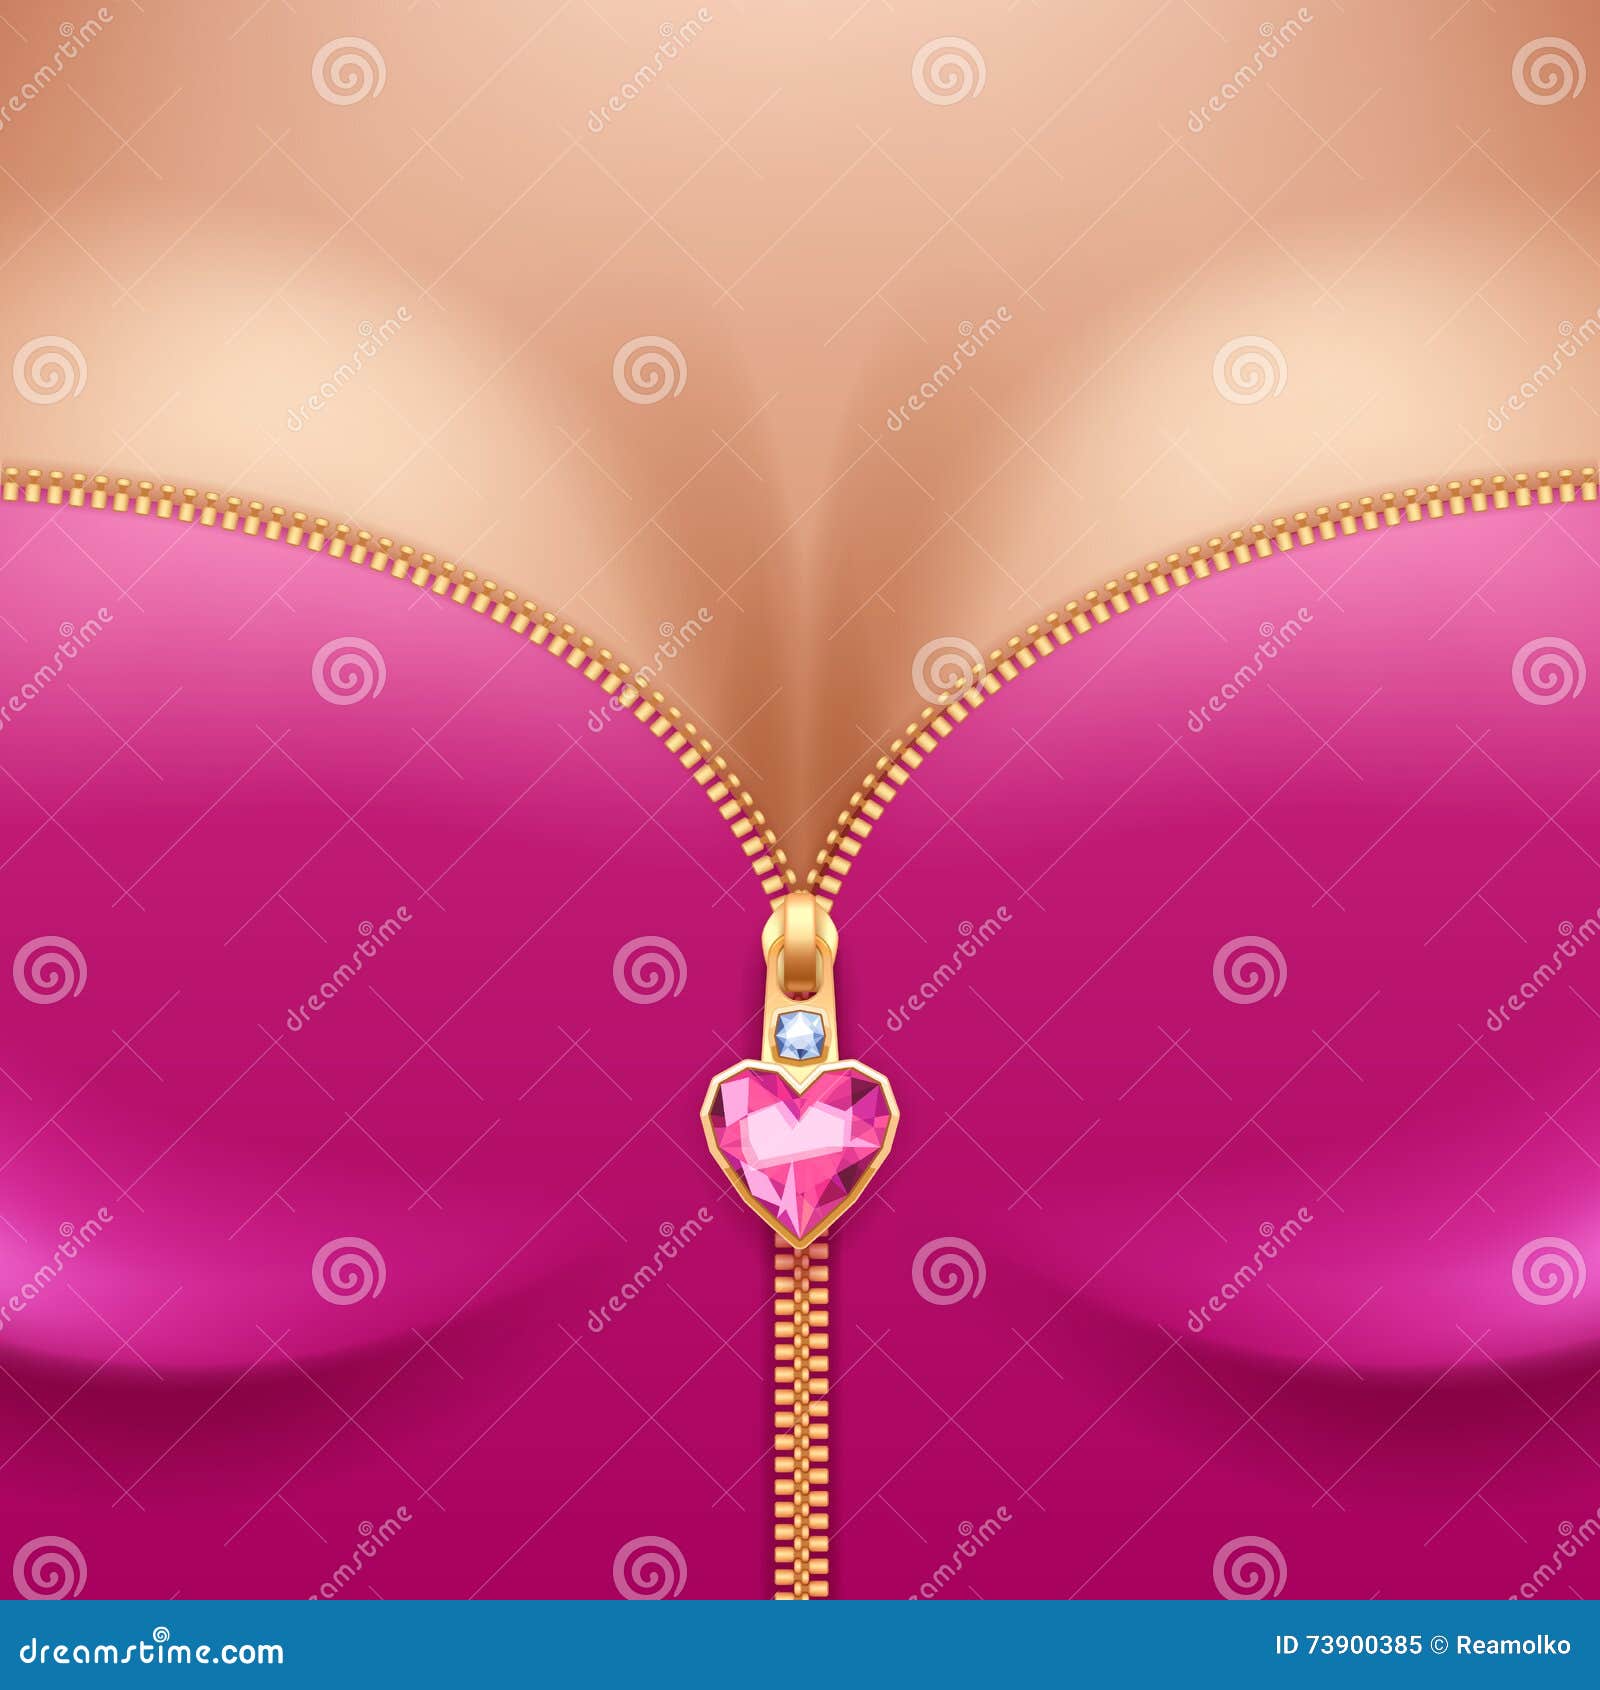 Bouncing Breast: Over 12 Royalty-Free Licensable Stock Vectors & Vector Art